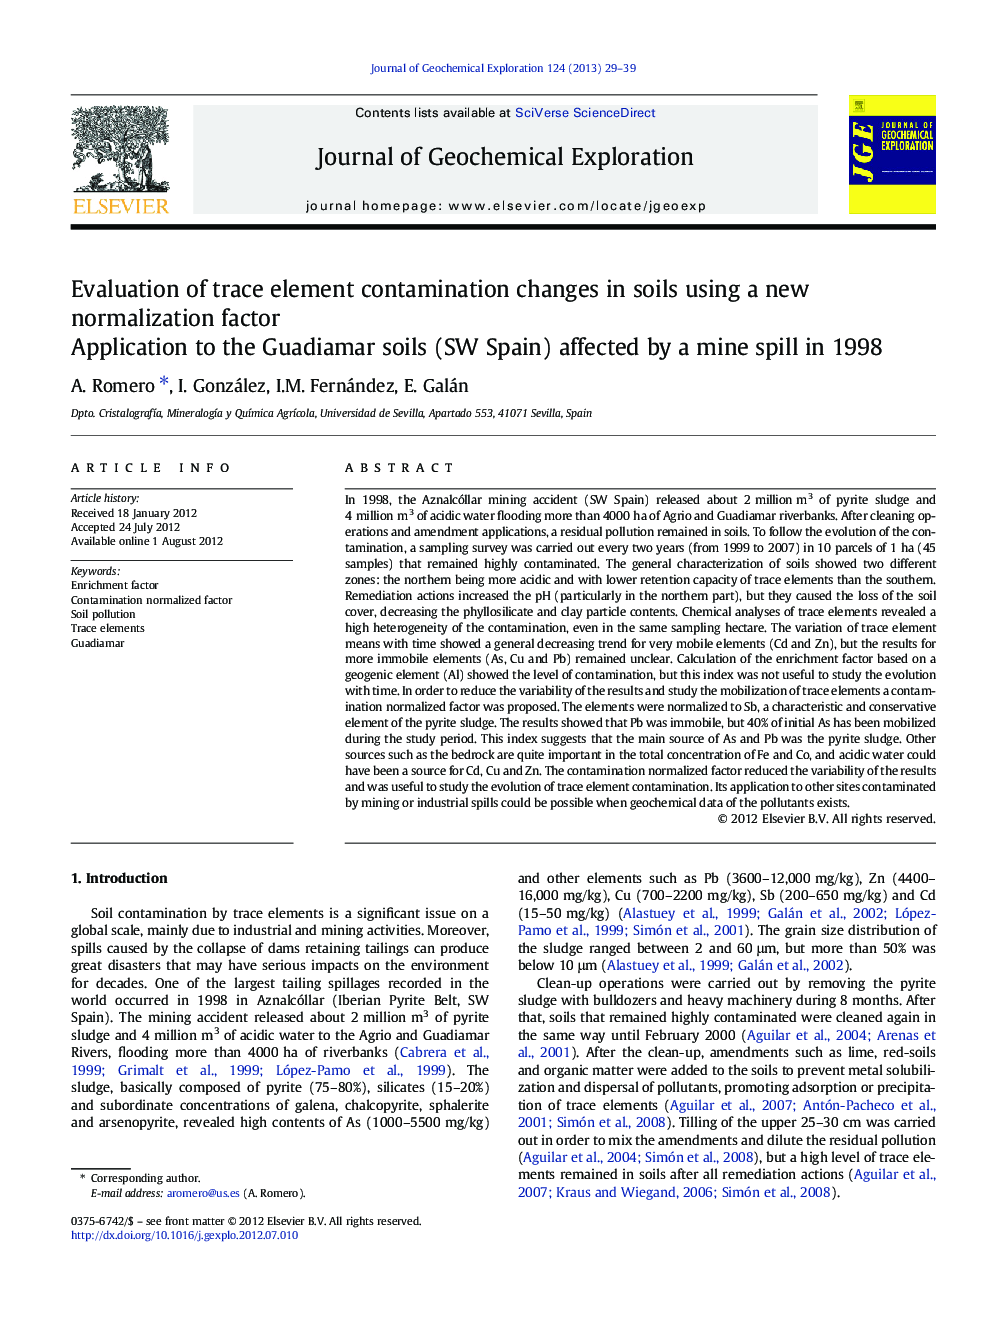 Evaluation of trace element contamination changes in soils using a new normalization factor: Application to the Guadiamar soils (SW Spain) affected by a mine spill in 1998